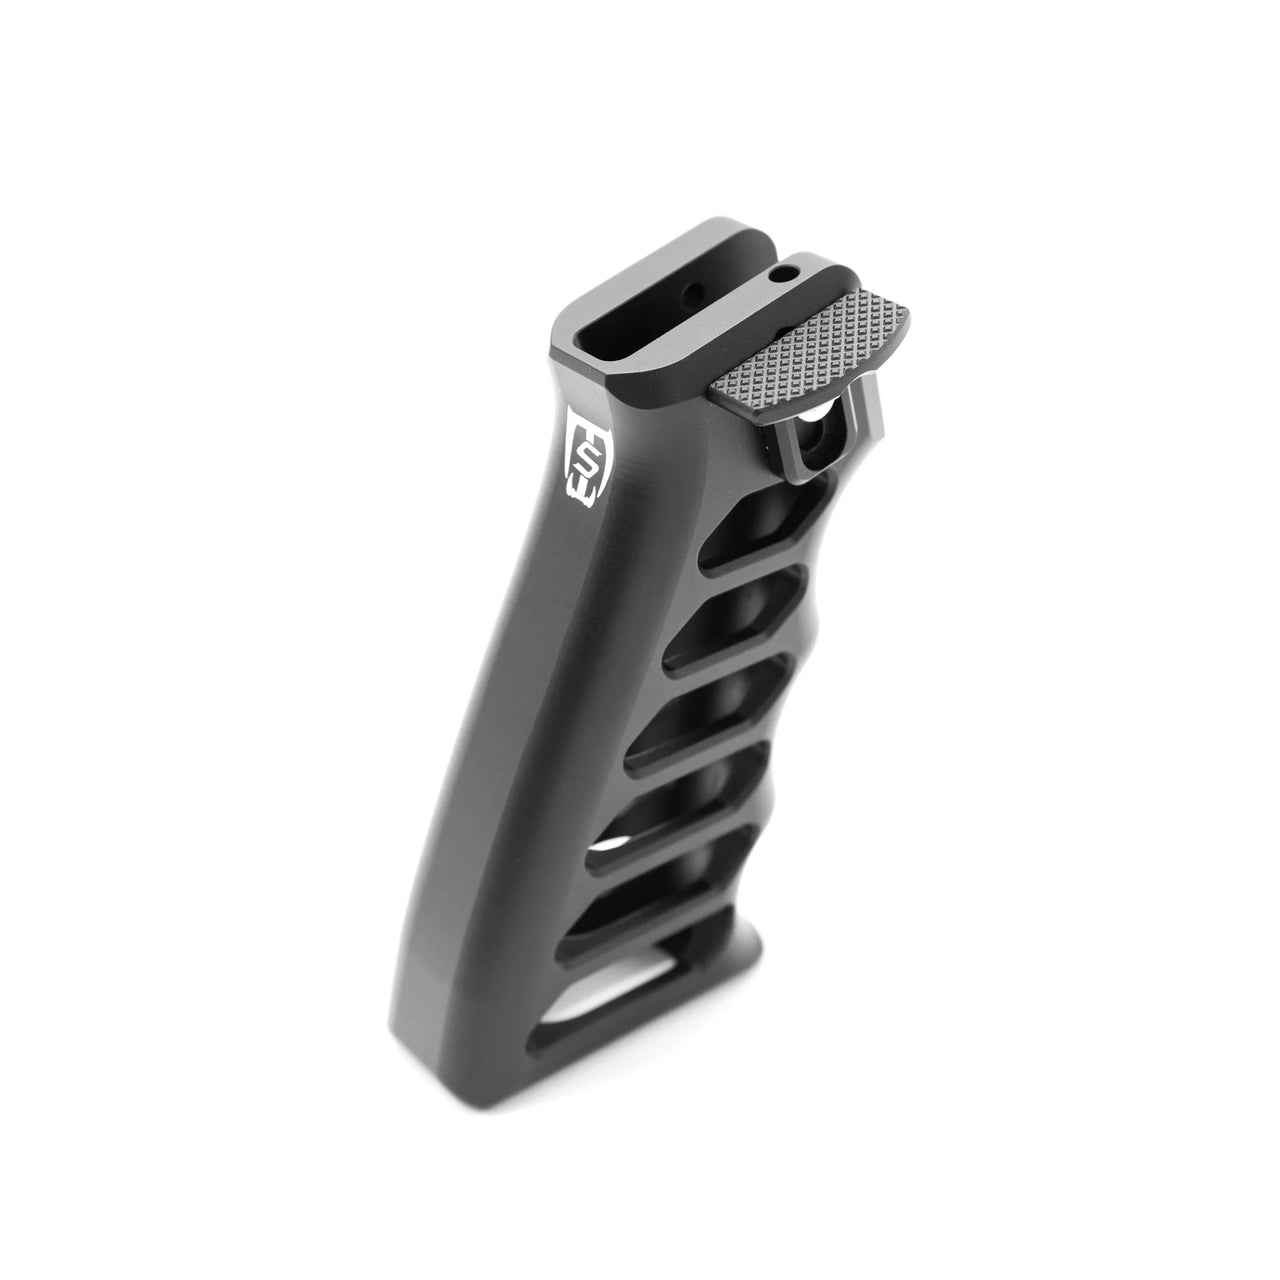 Saber Tactical | AR STYLE GRIP WITH AMBIDEXTROUS THUMB REST - ST0049